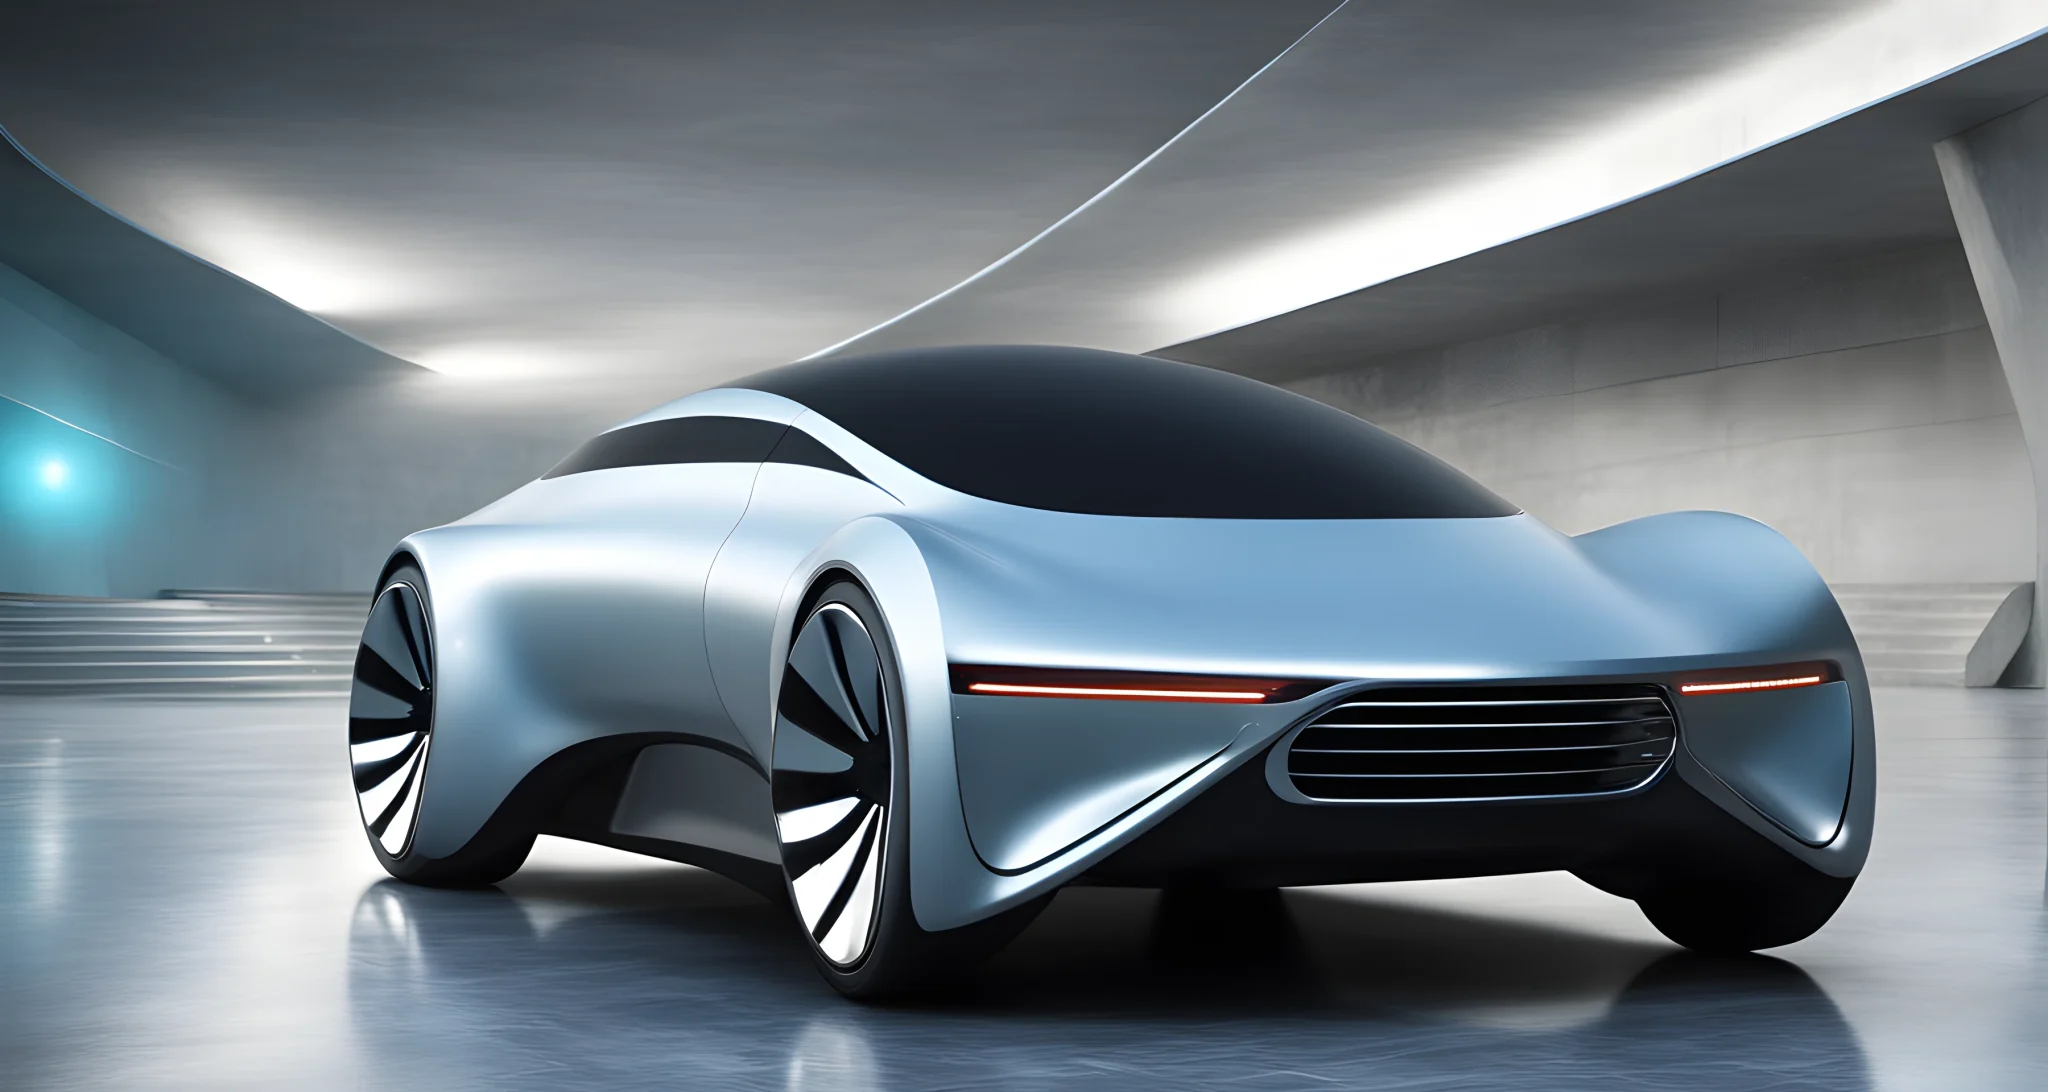 The image shows a sleek, modern hybrid vehicle with a futuristic design and advanced technology features.